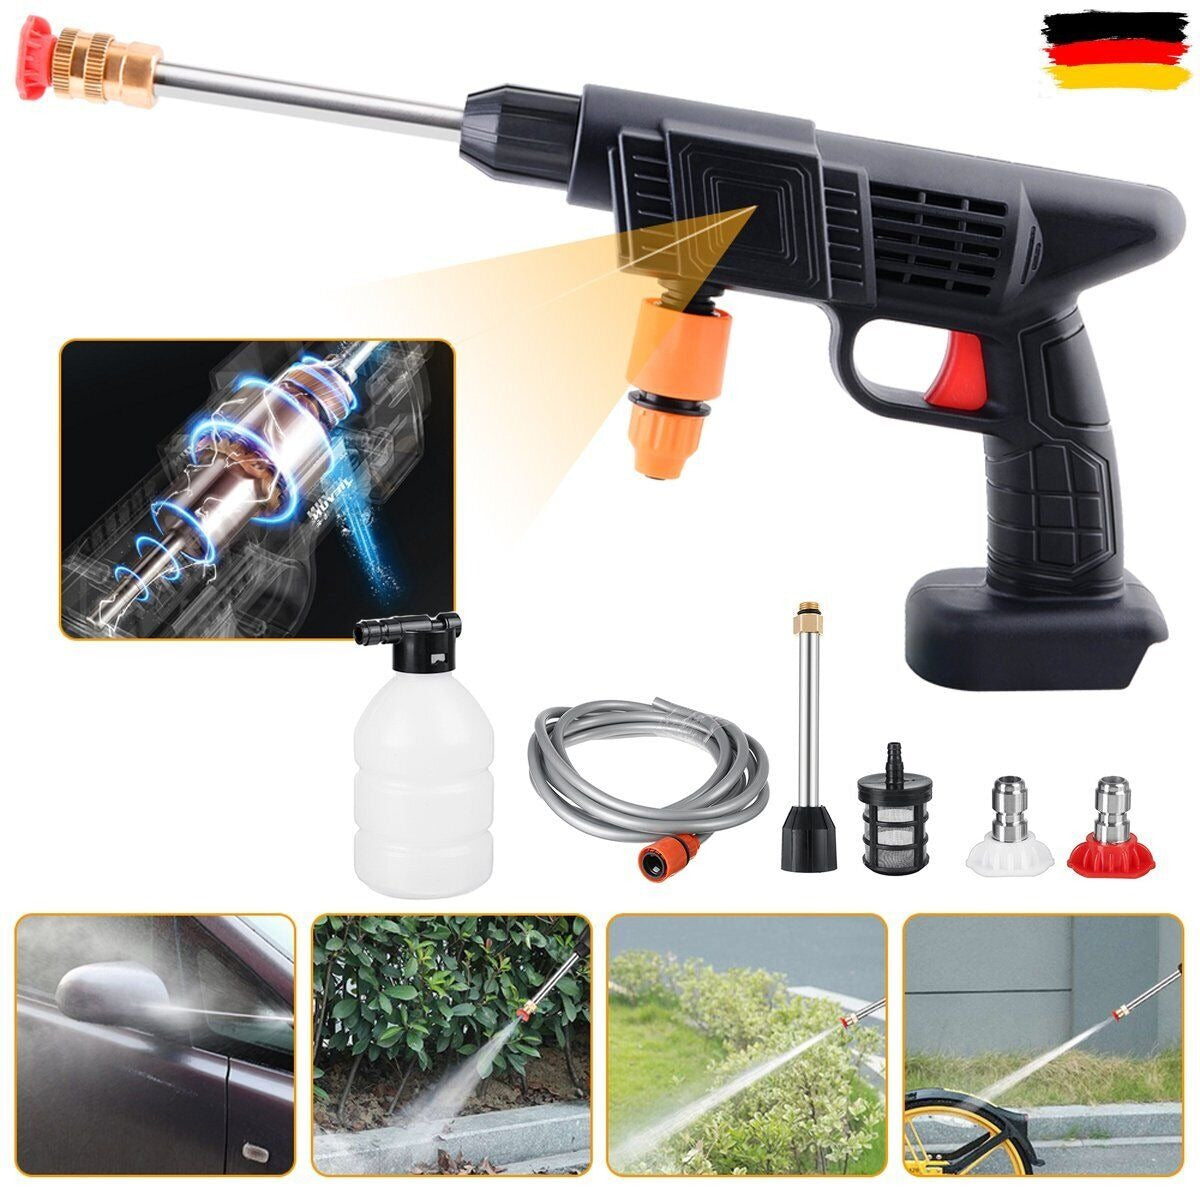 4 different arears where Cordless Car Washing Water Gun can be used